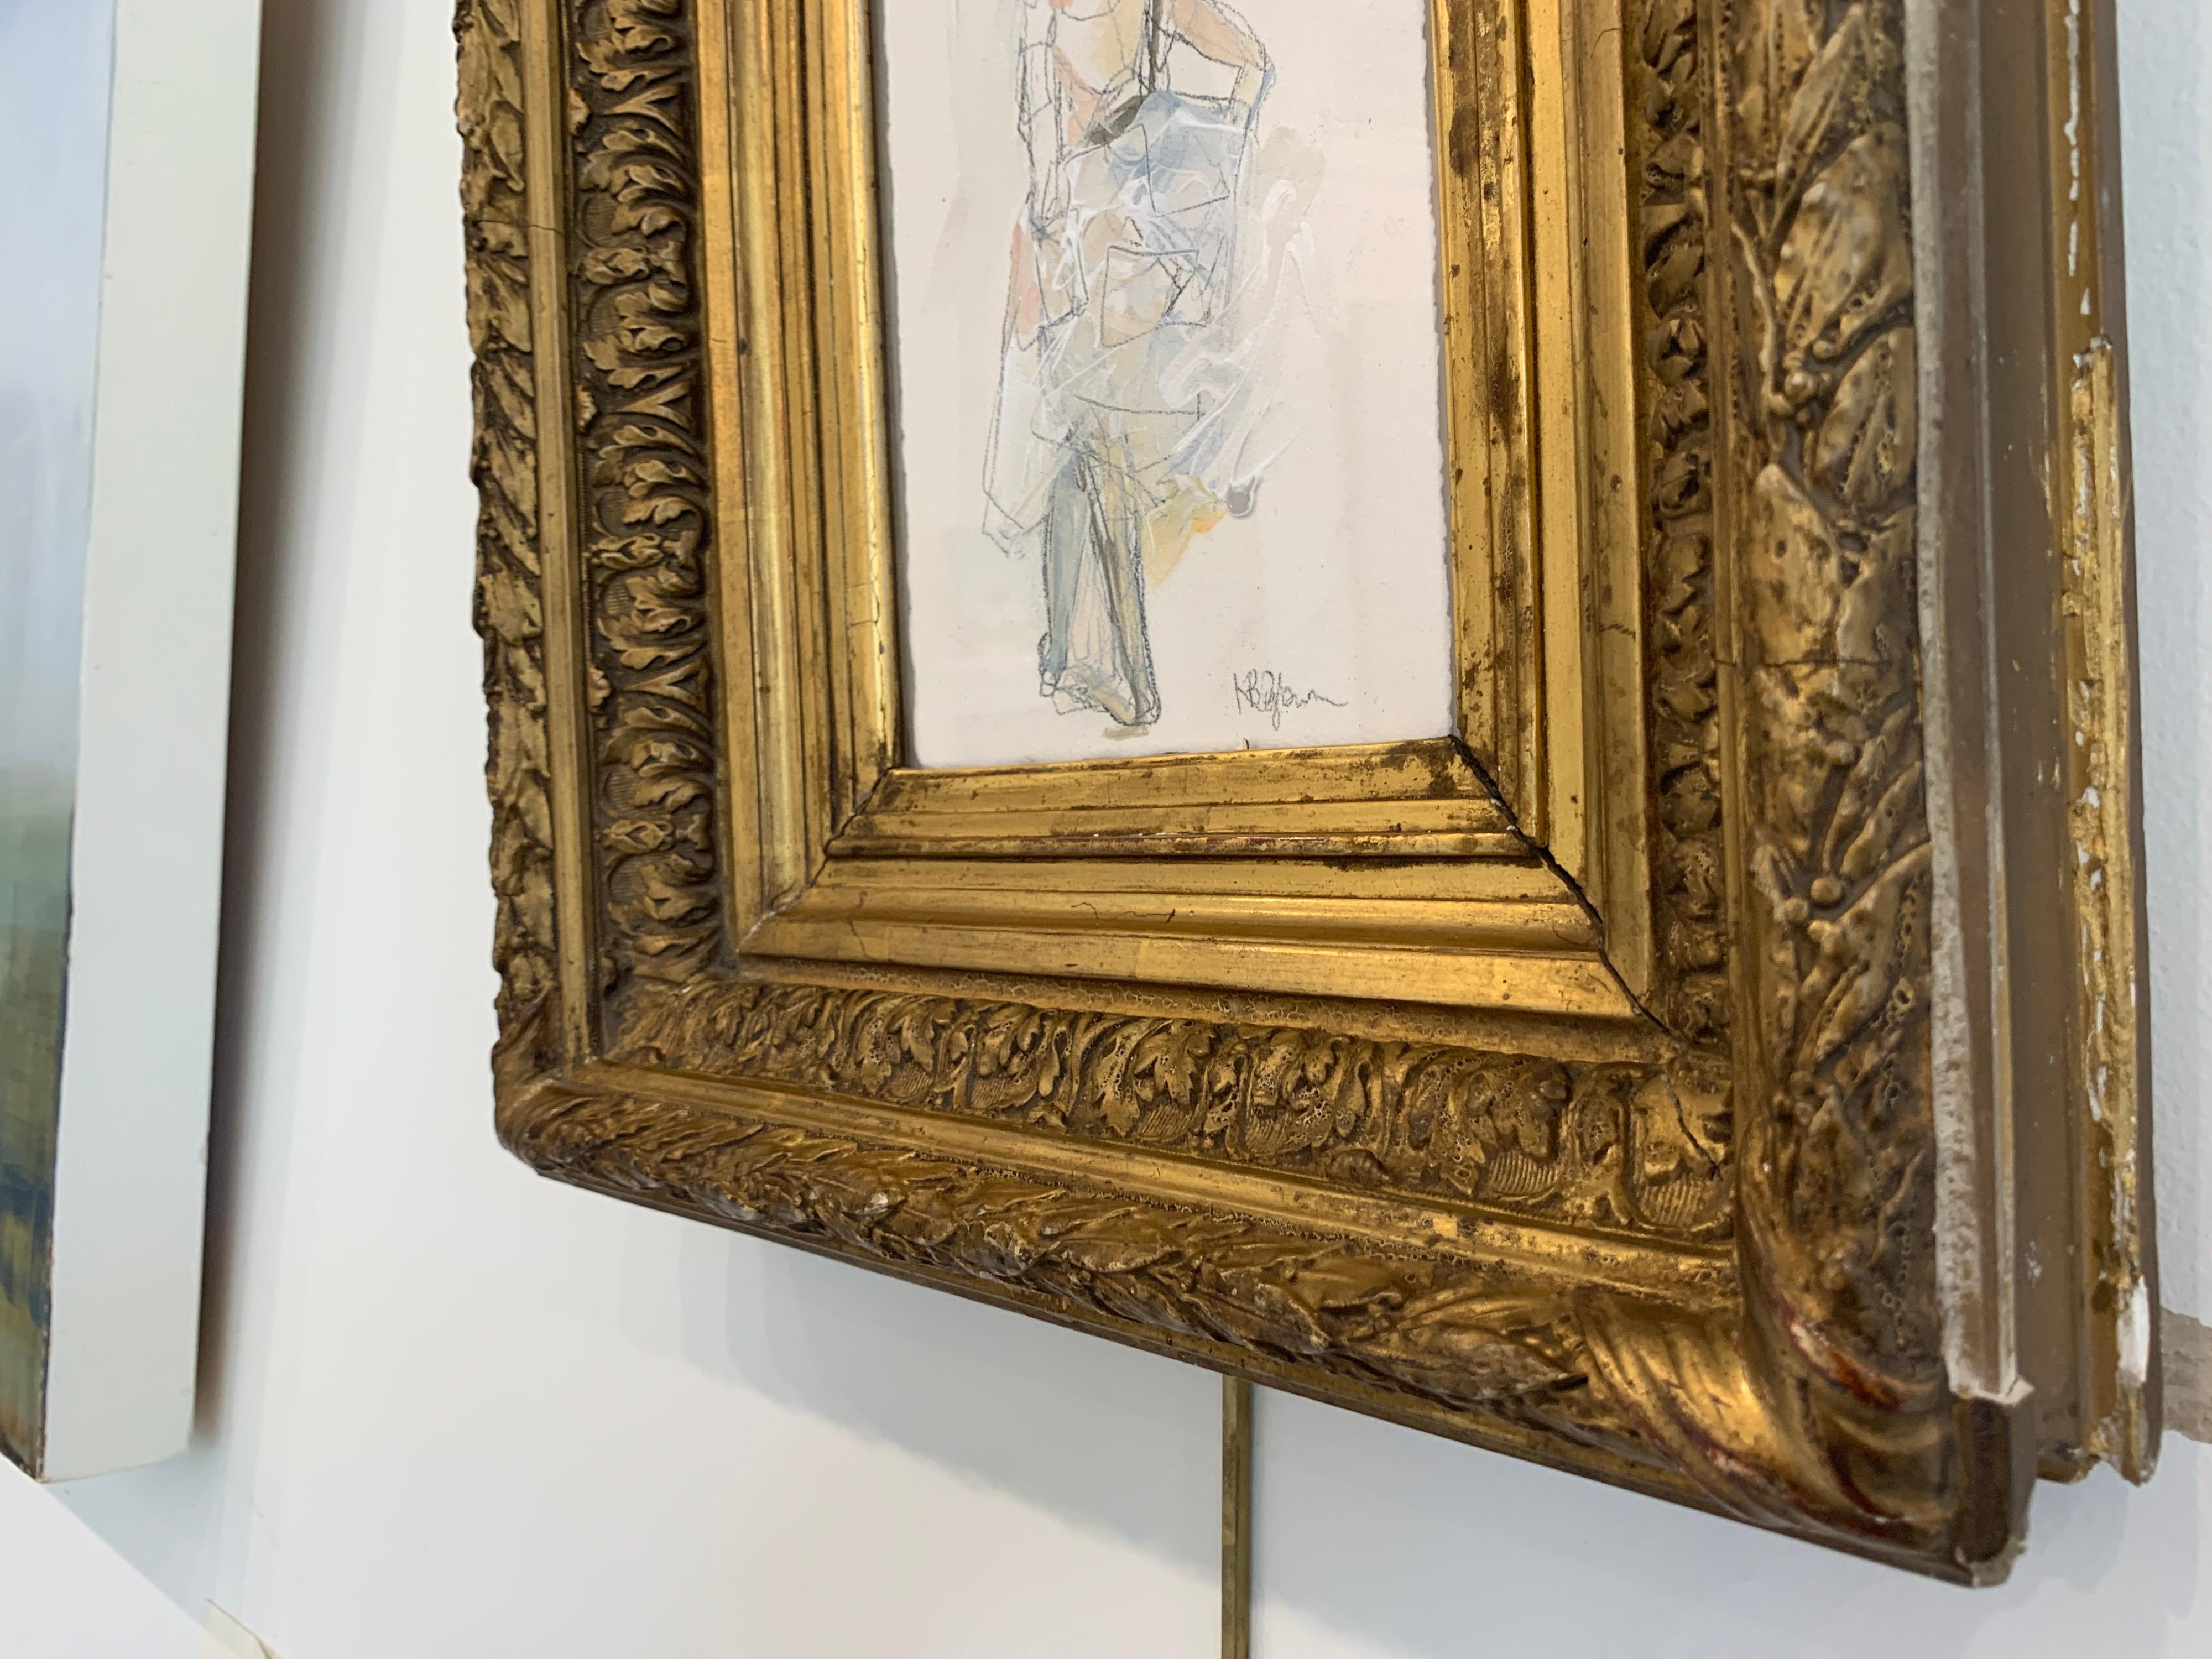 Dancer #2 by Kelley Ogburn Small Ballerina Painting on paper in Antique Frame - Brown Figurative Painting by Kelley B. Ogburn